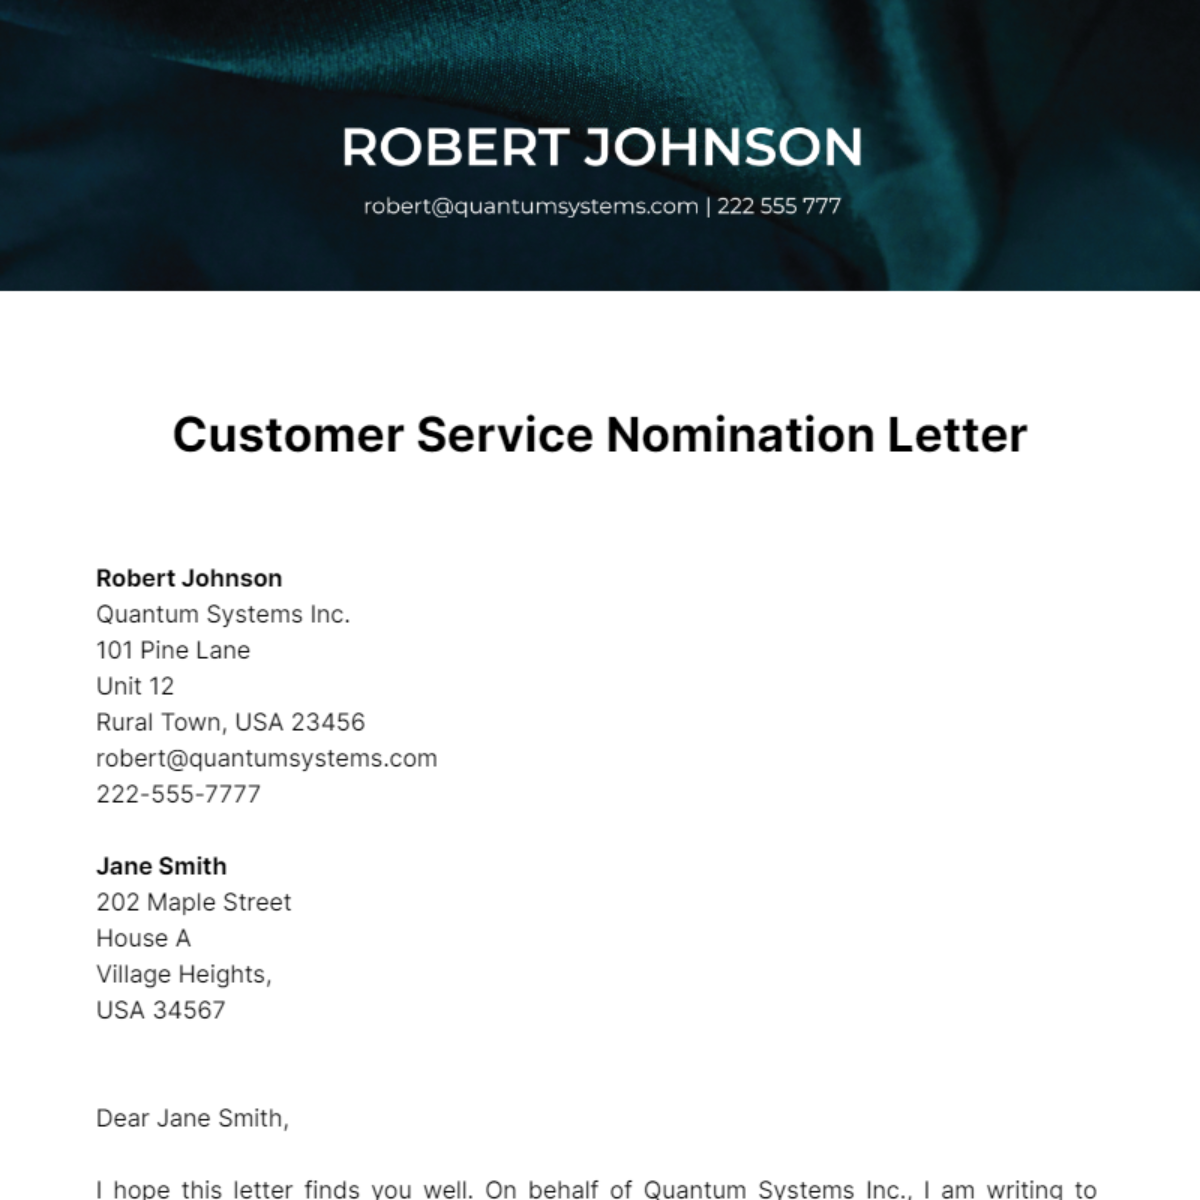 Customer Service Nomination Letter Template